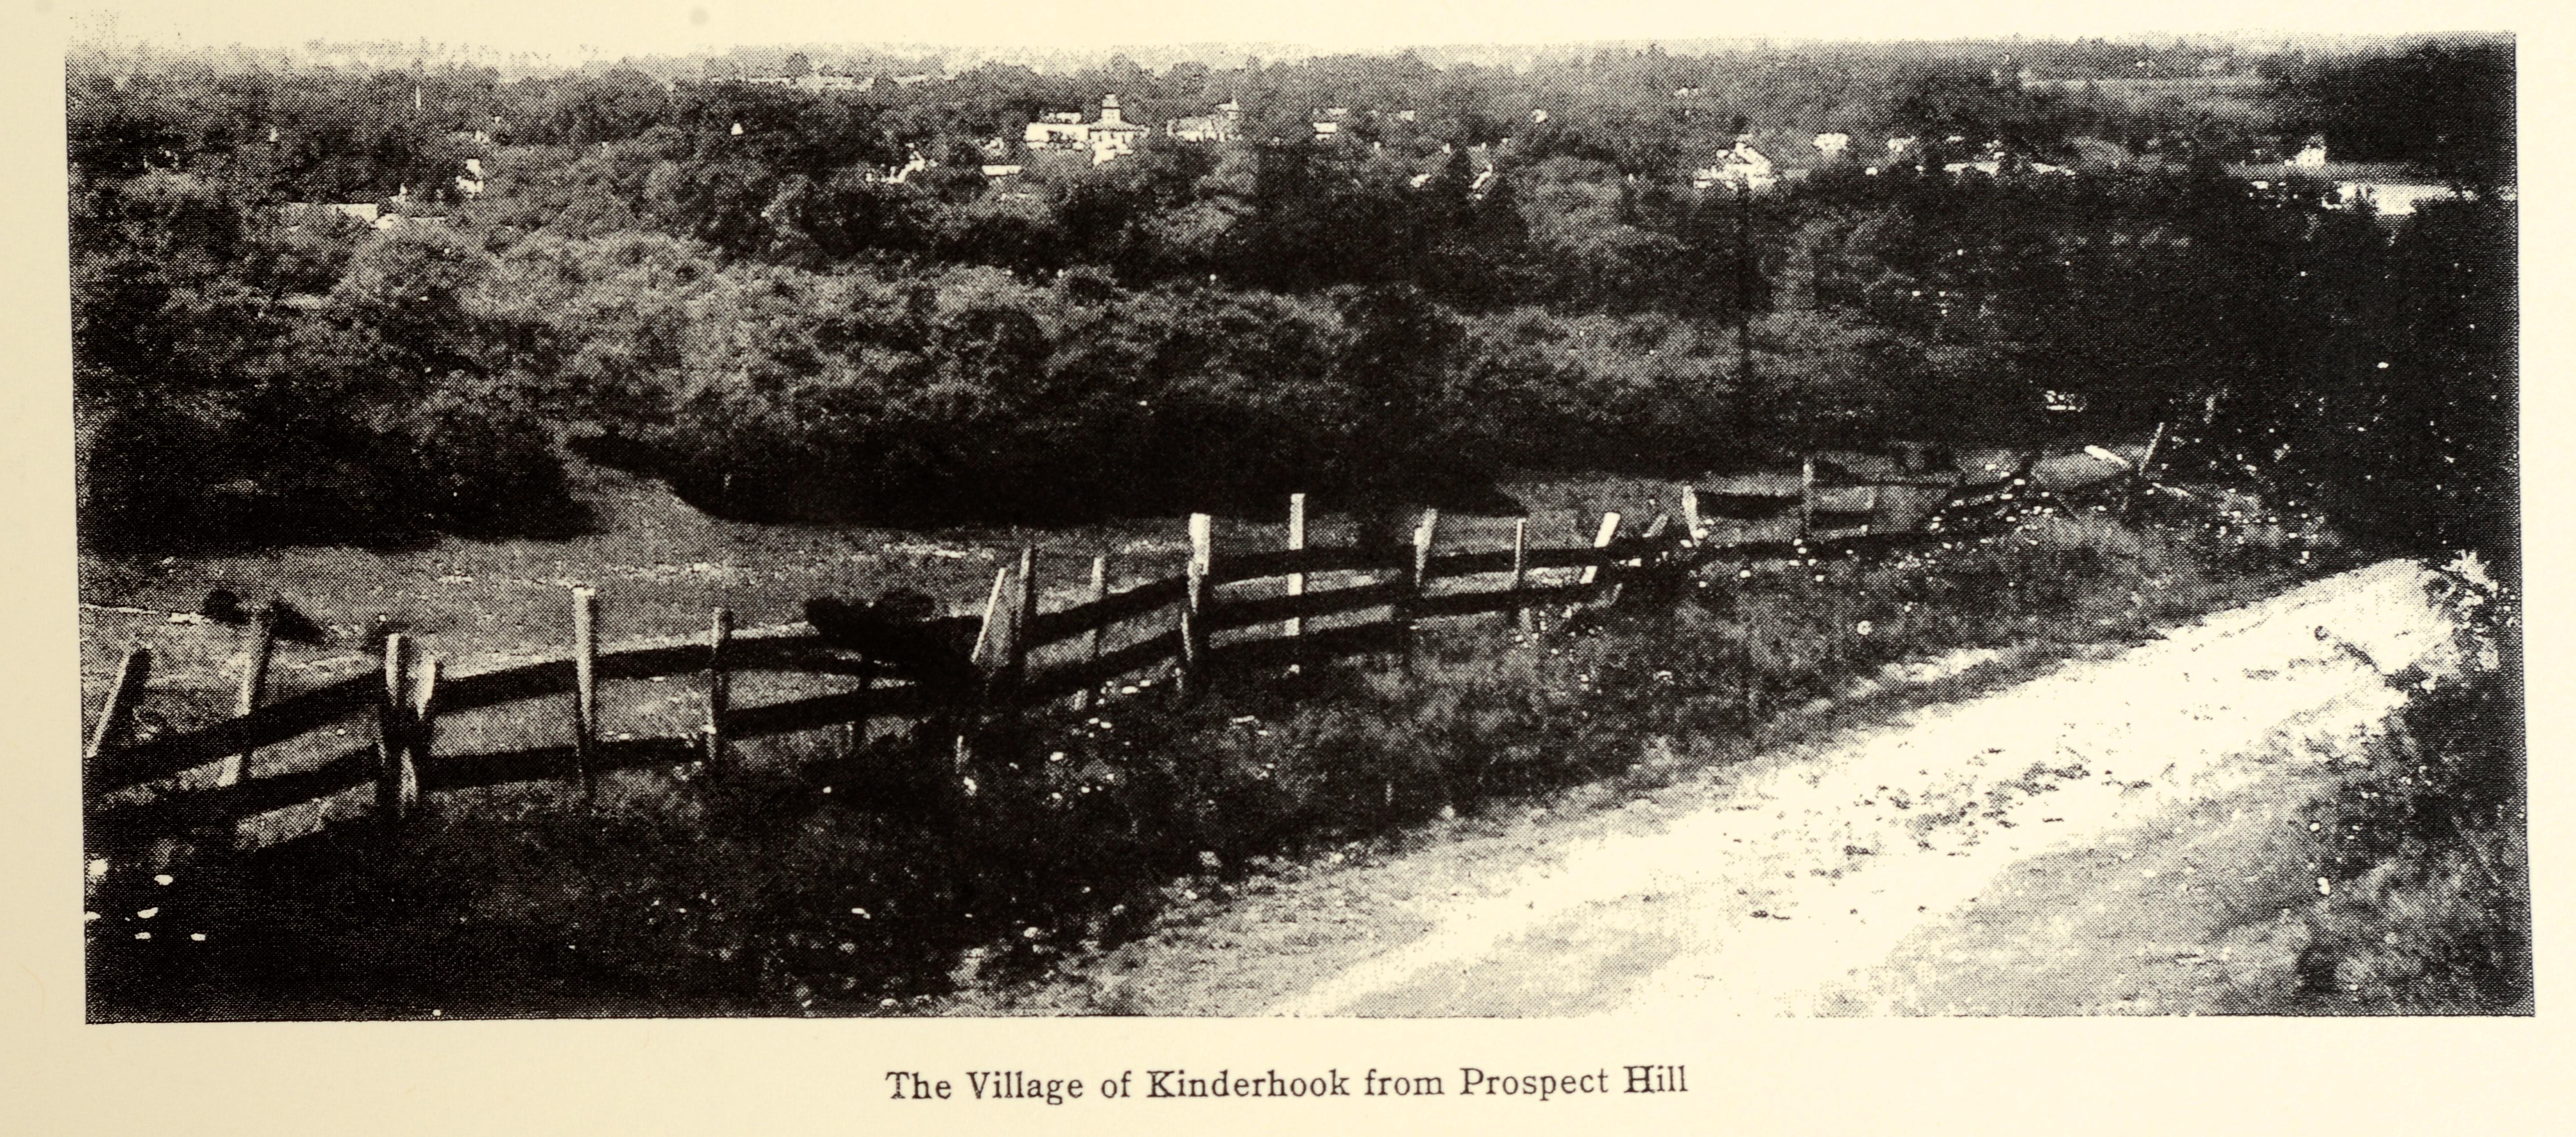 A History of Old Kinderhook by Edward Augustus Collier. G. P. Putnam's and Sons, NY, 1914 (original), reprinted by Higginson Book Co, MA. A reprinted hardcover. Including the Story of the Early Settlers, Their Homesteads, Their Traditions, and Their